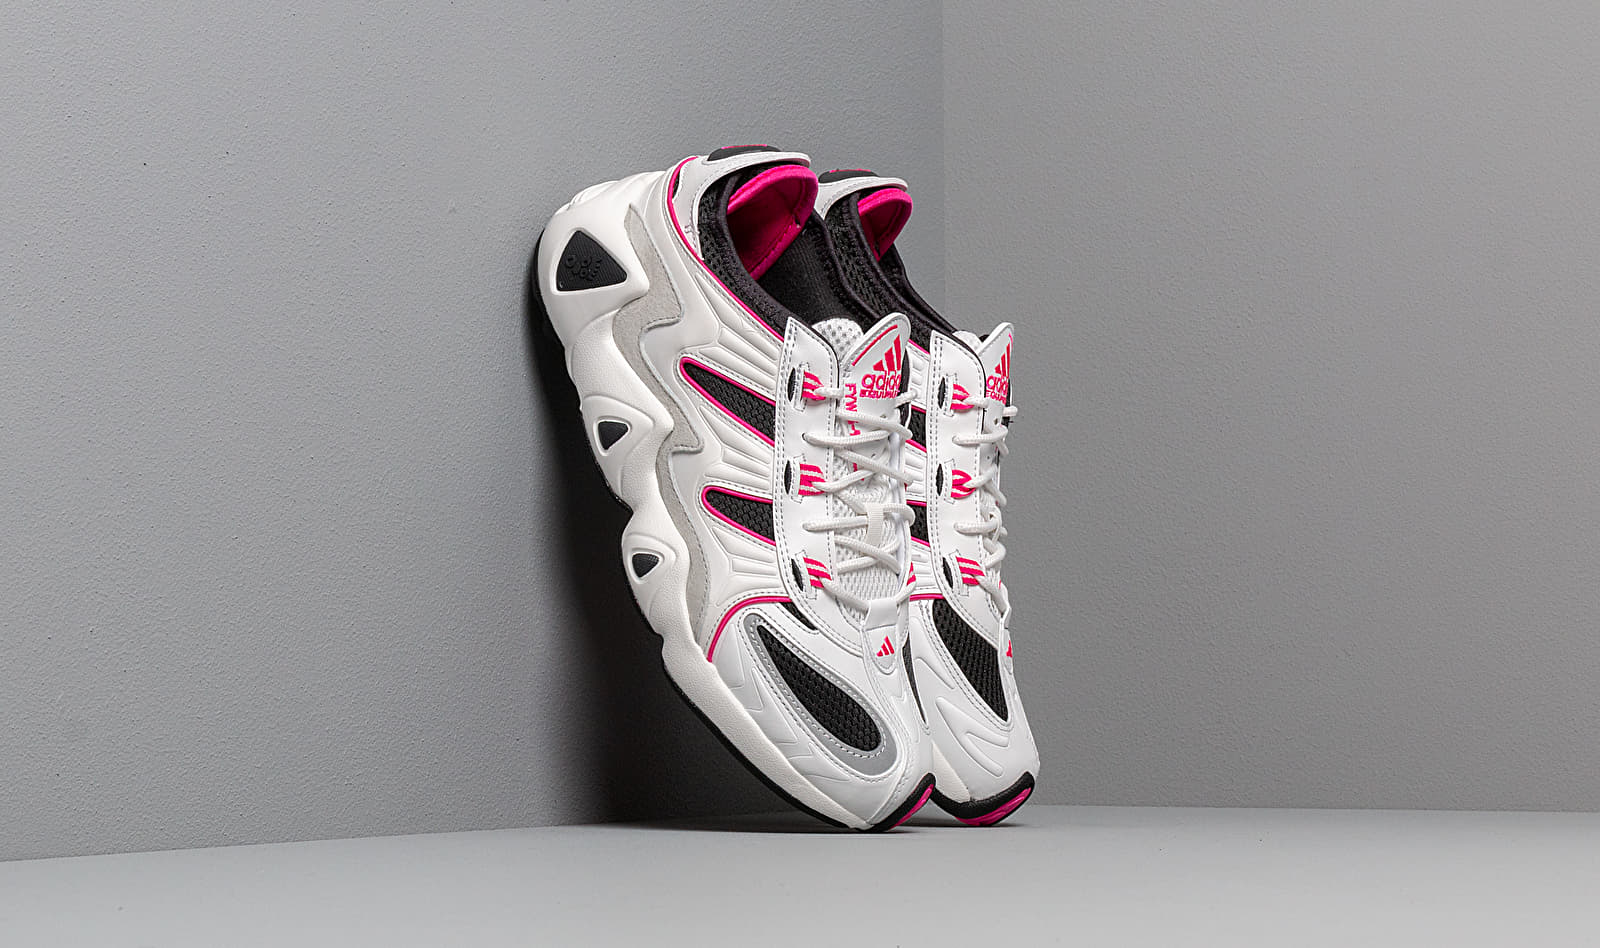 adidas FYW S-97 Crystal White/ Crystal White/ Shock Pink